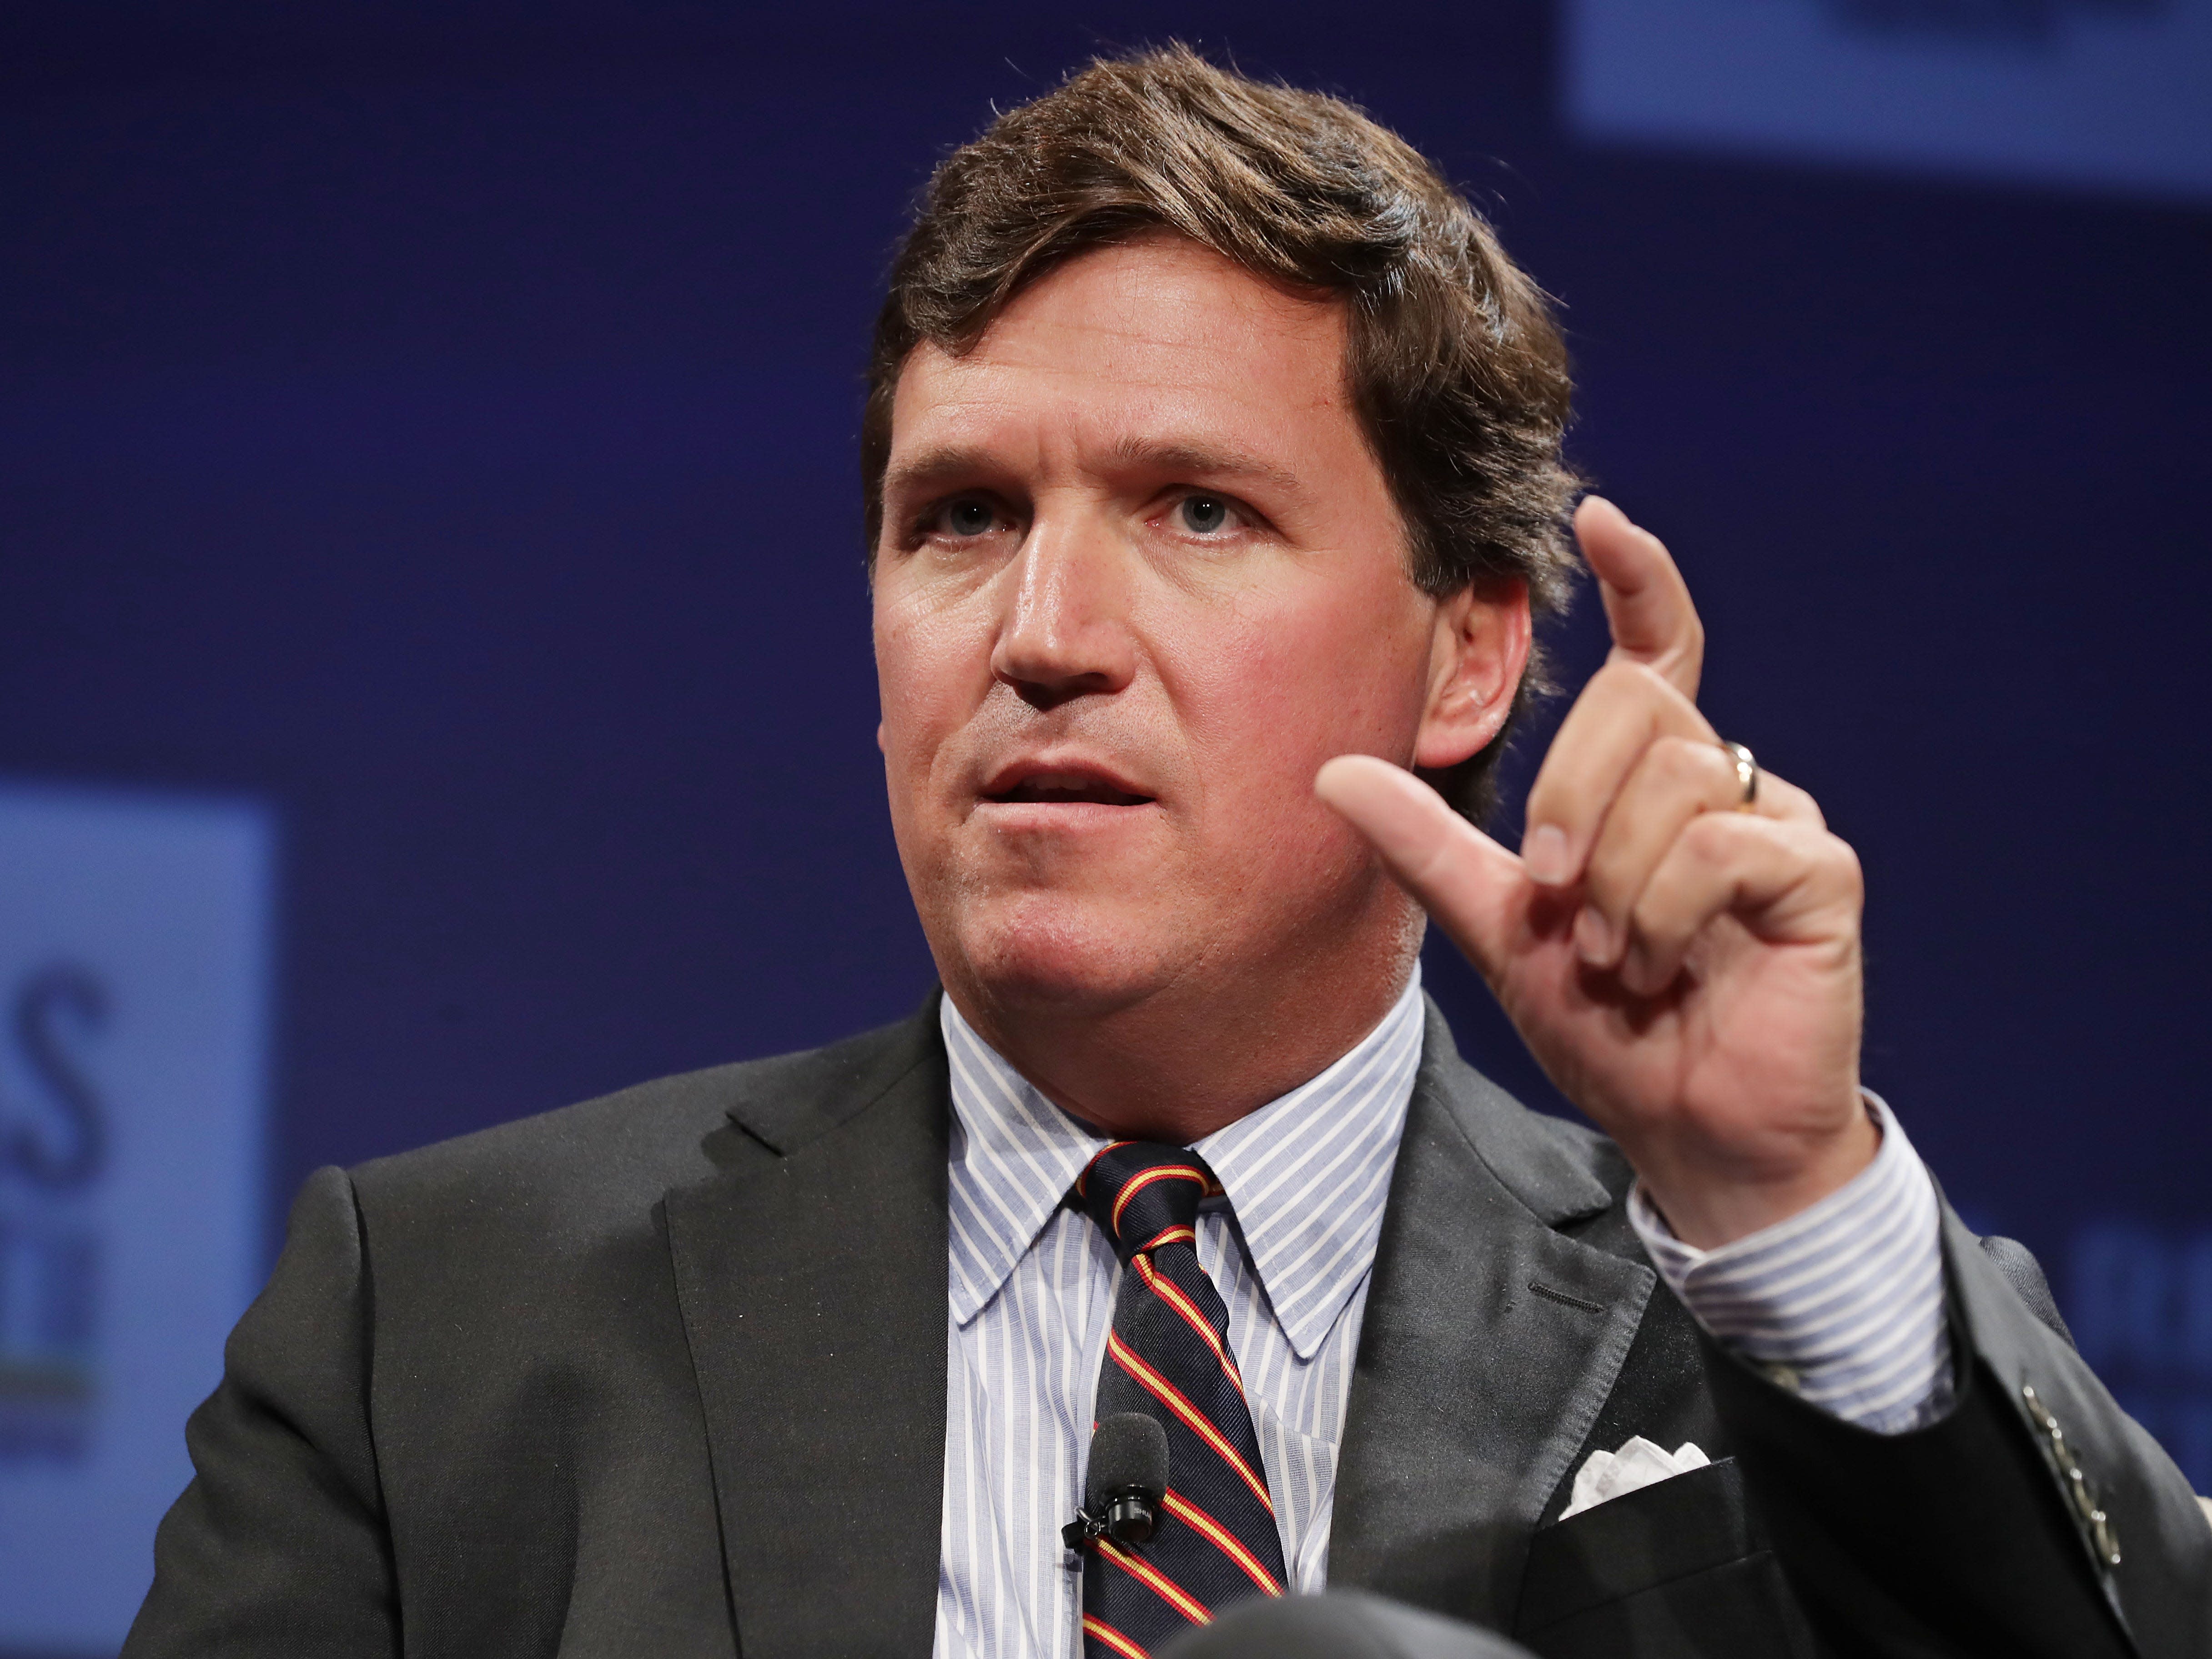 Tucker Carlson says he 'could care less' if people say he's a 'pawn of Putin,' as he echoes Russian propaganda on Ukraine